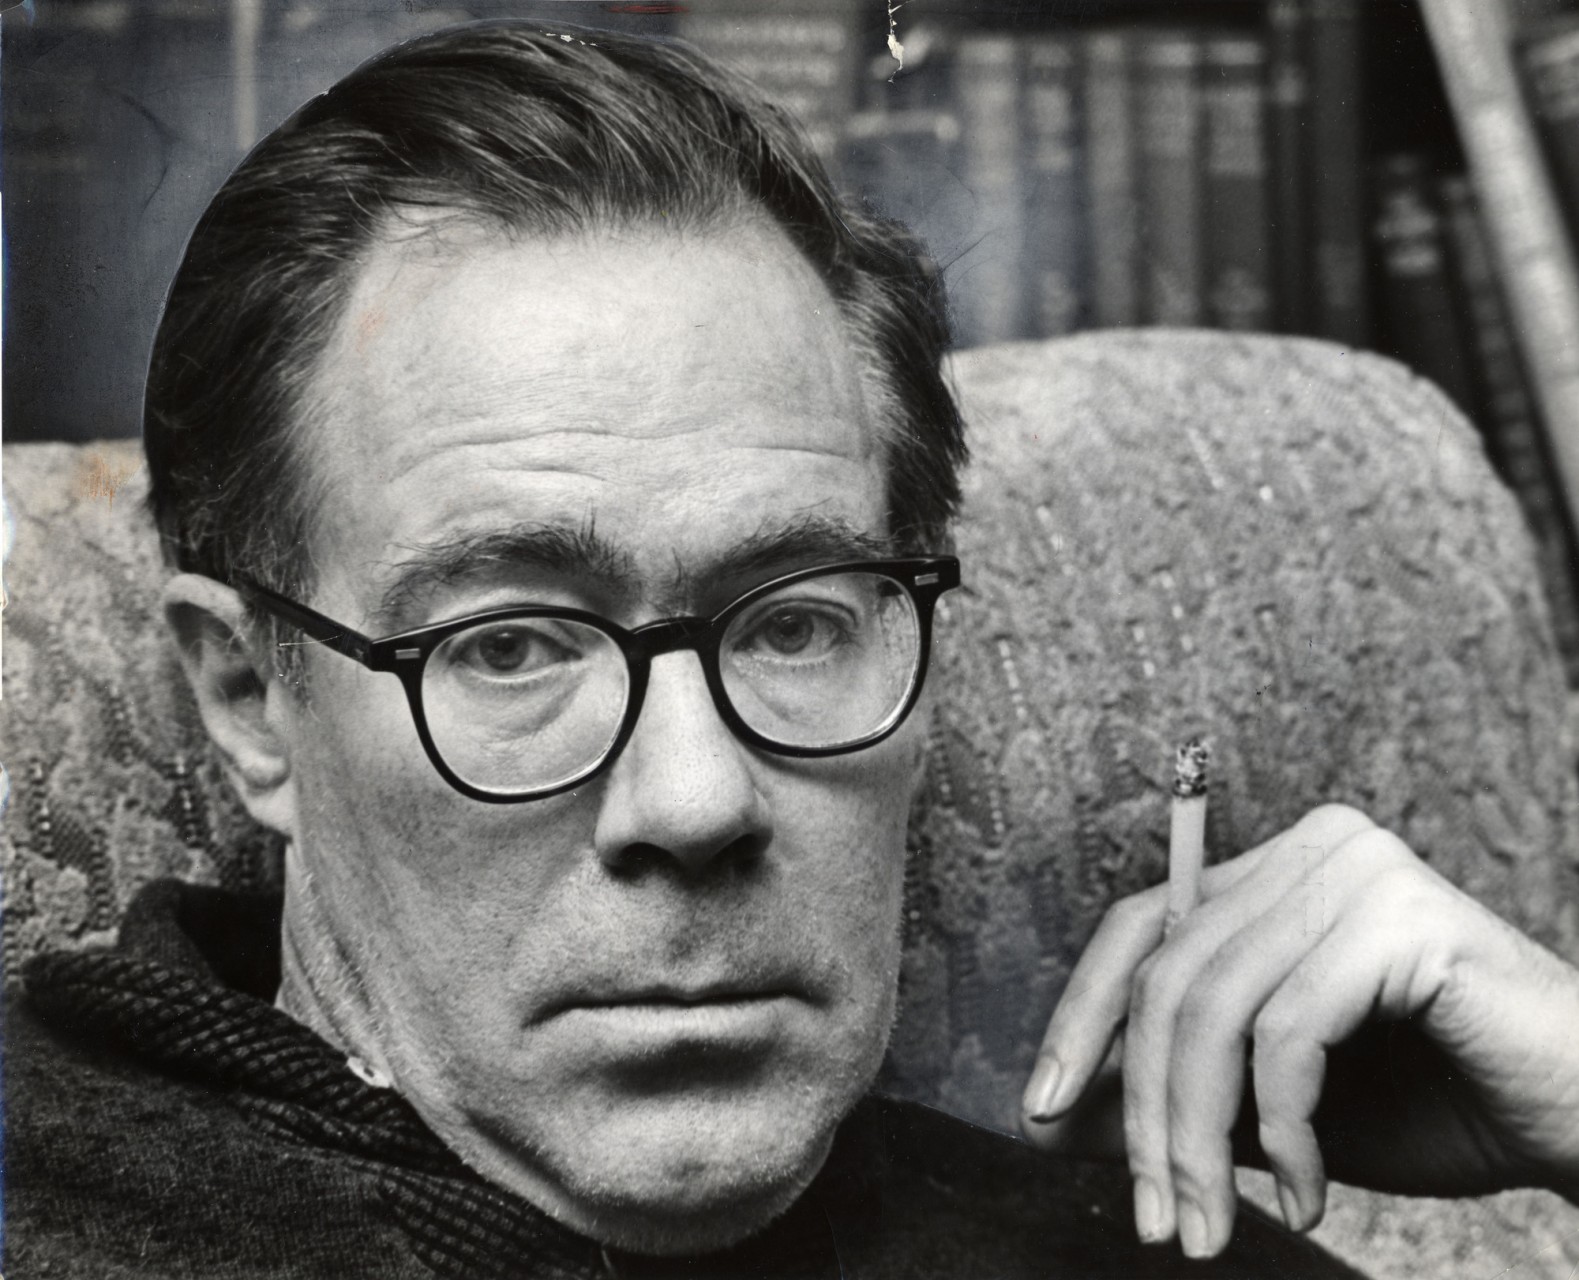 Dispossession, dreams, delusions: the poetry of John Berryman